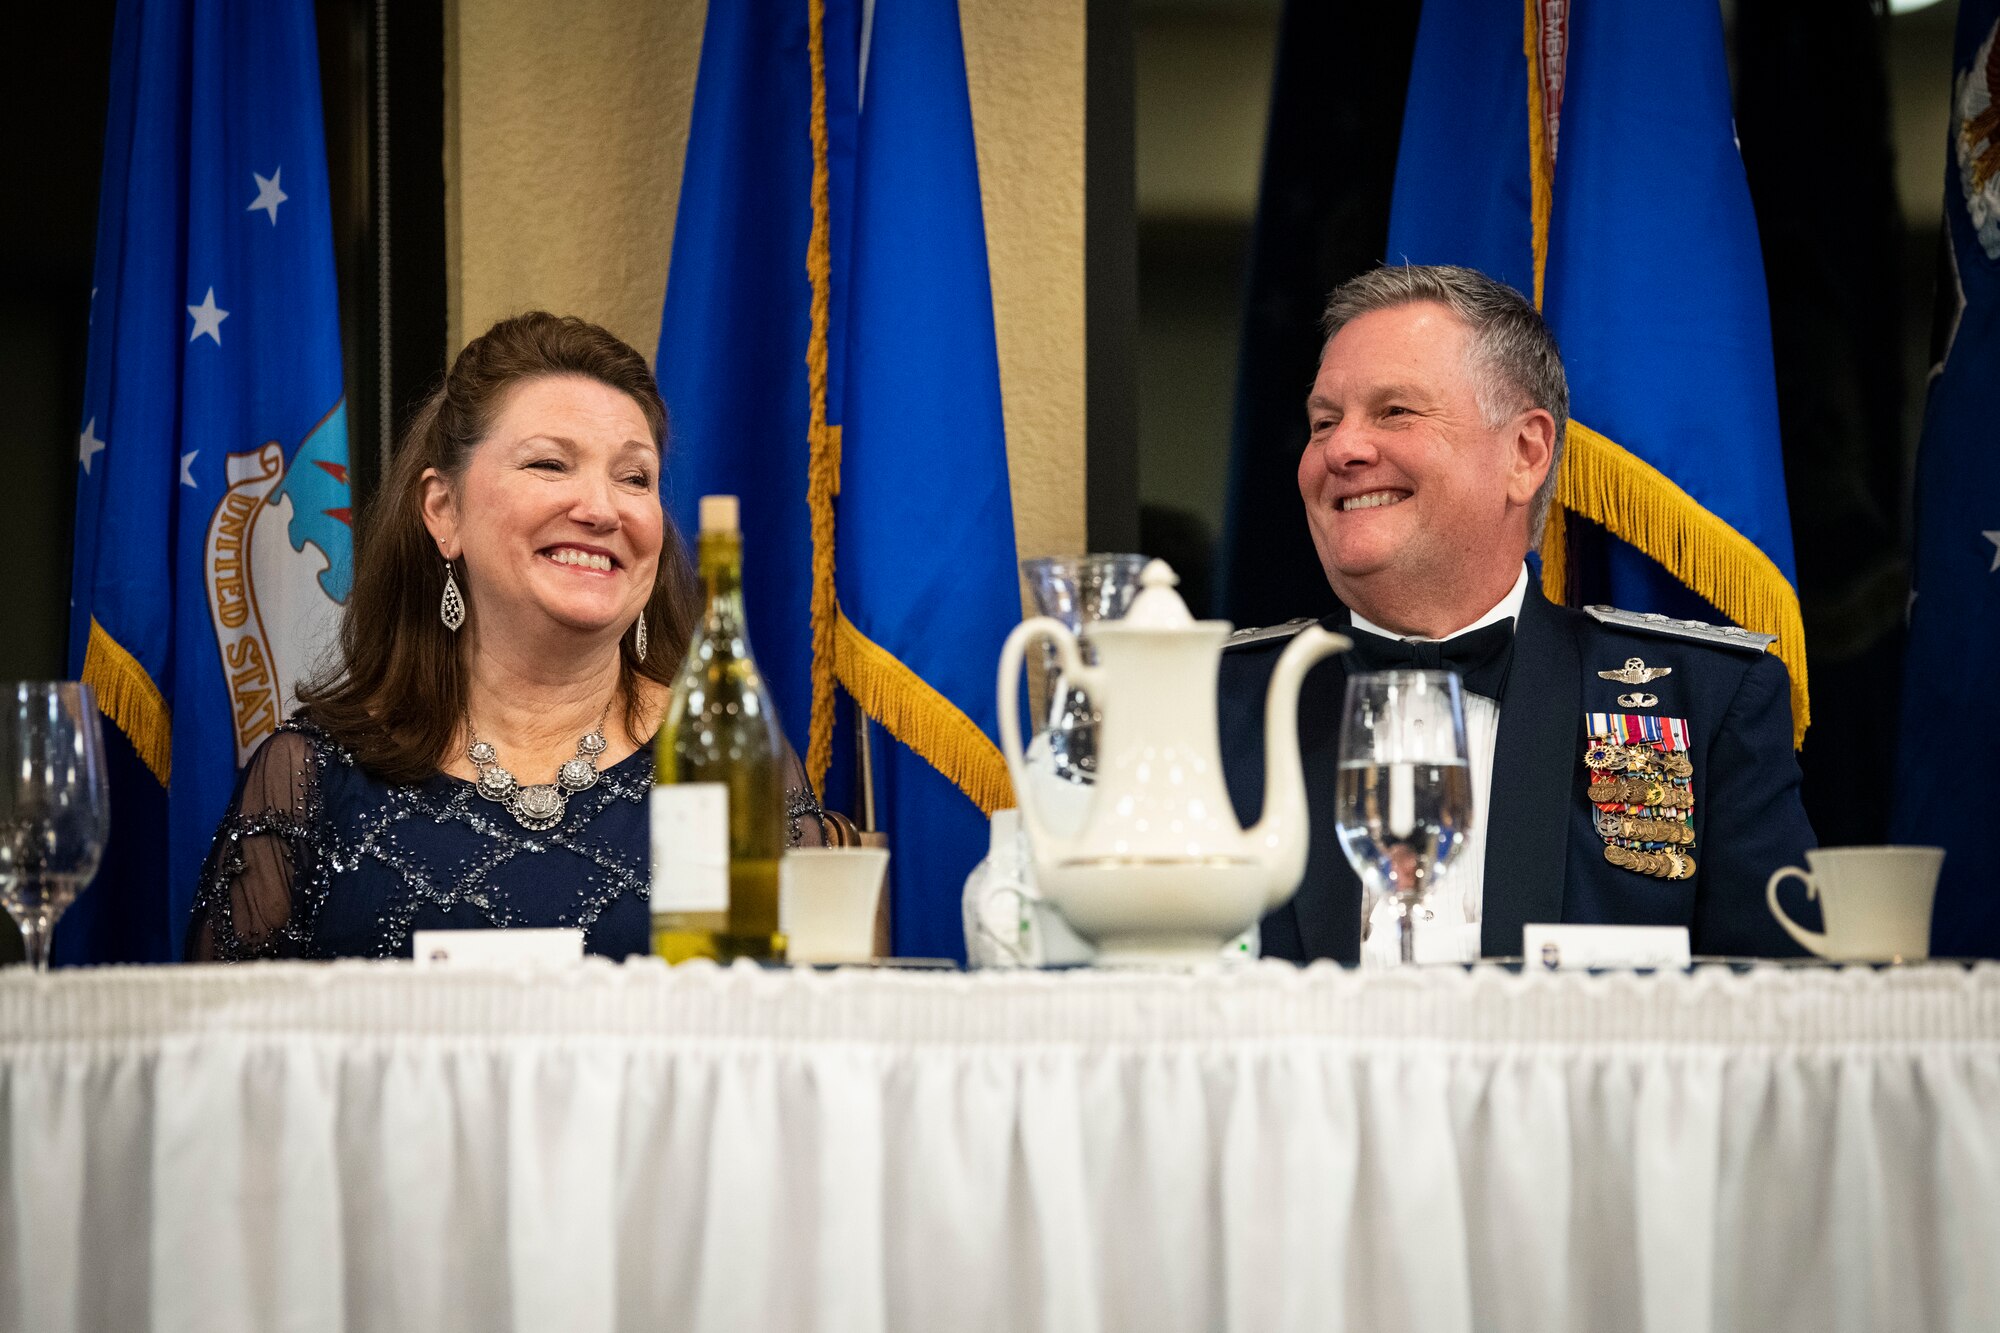 U.S. Air Force retired Lt. Gen. Marshall B. Webb, former Air Force Special Operations Command commander and Air Education and Training Command commander, and wife, Dawna, laugh at a speech given during an Order of the Sword ceremony in his honor at Keesler Air Force Base, Mississippi, Oct. 15, 2022.